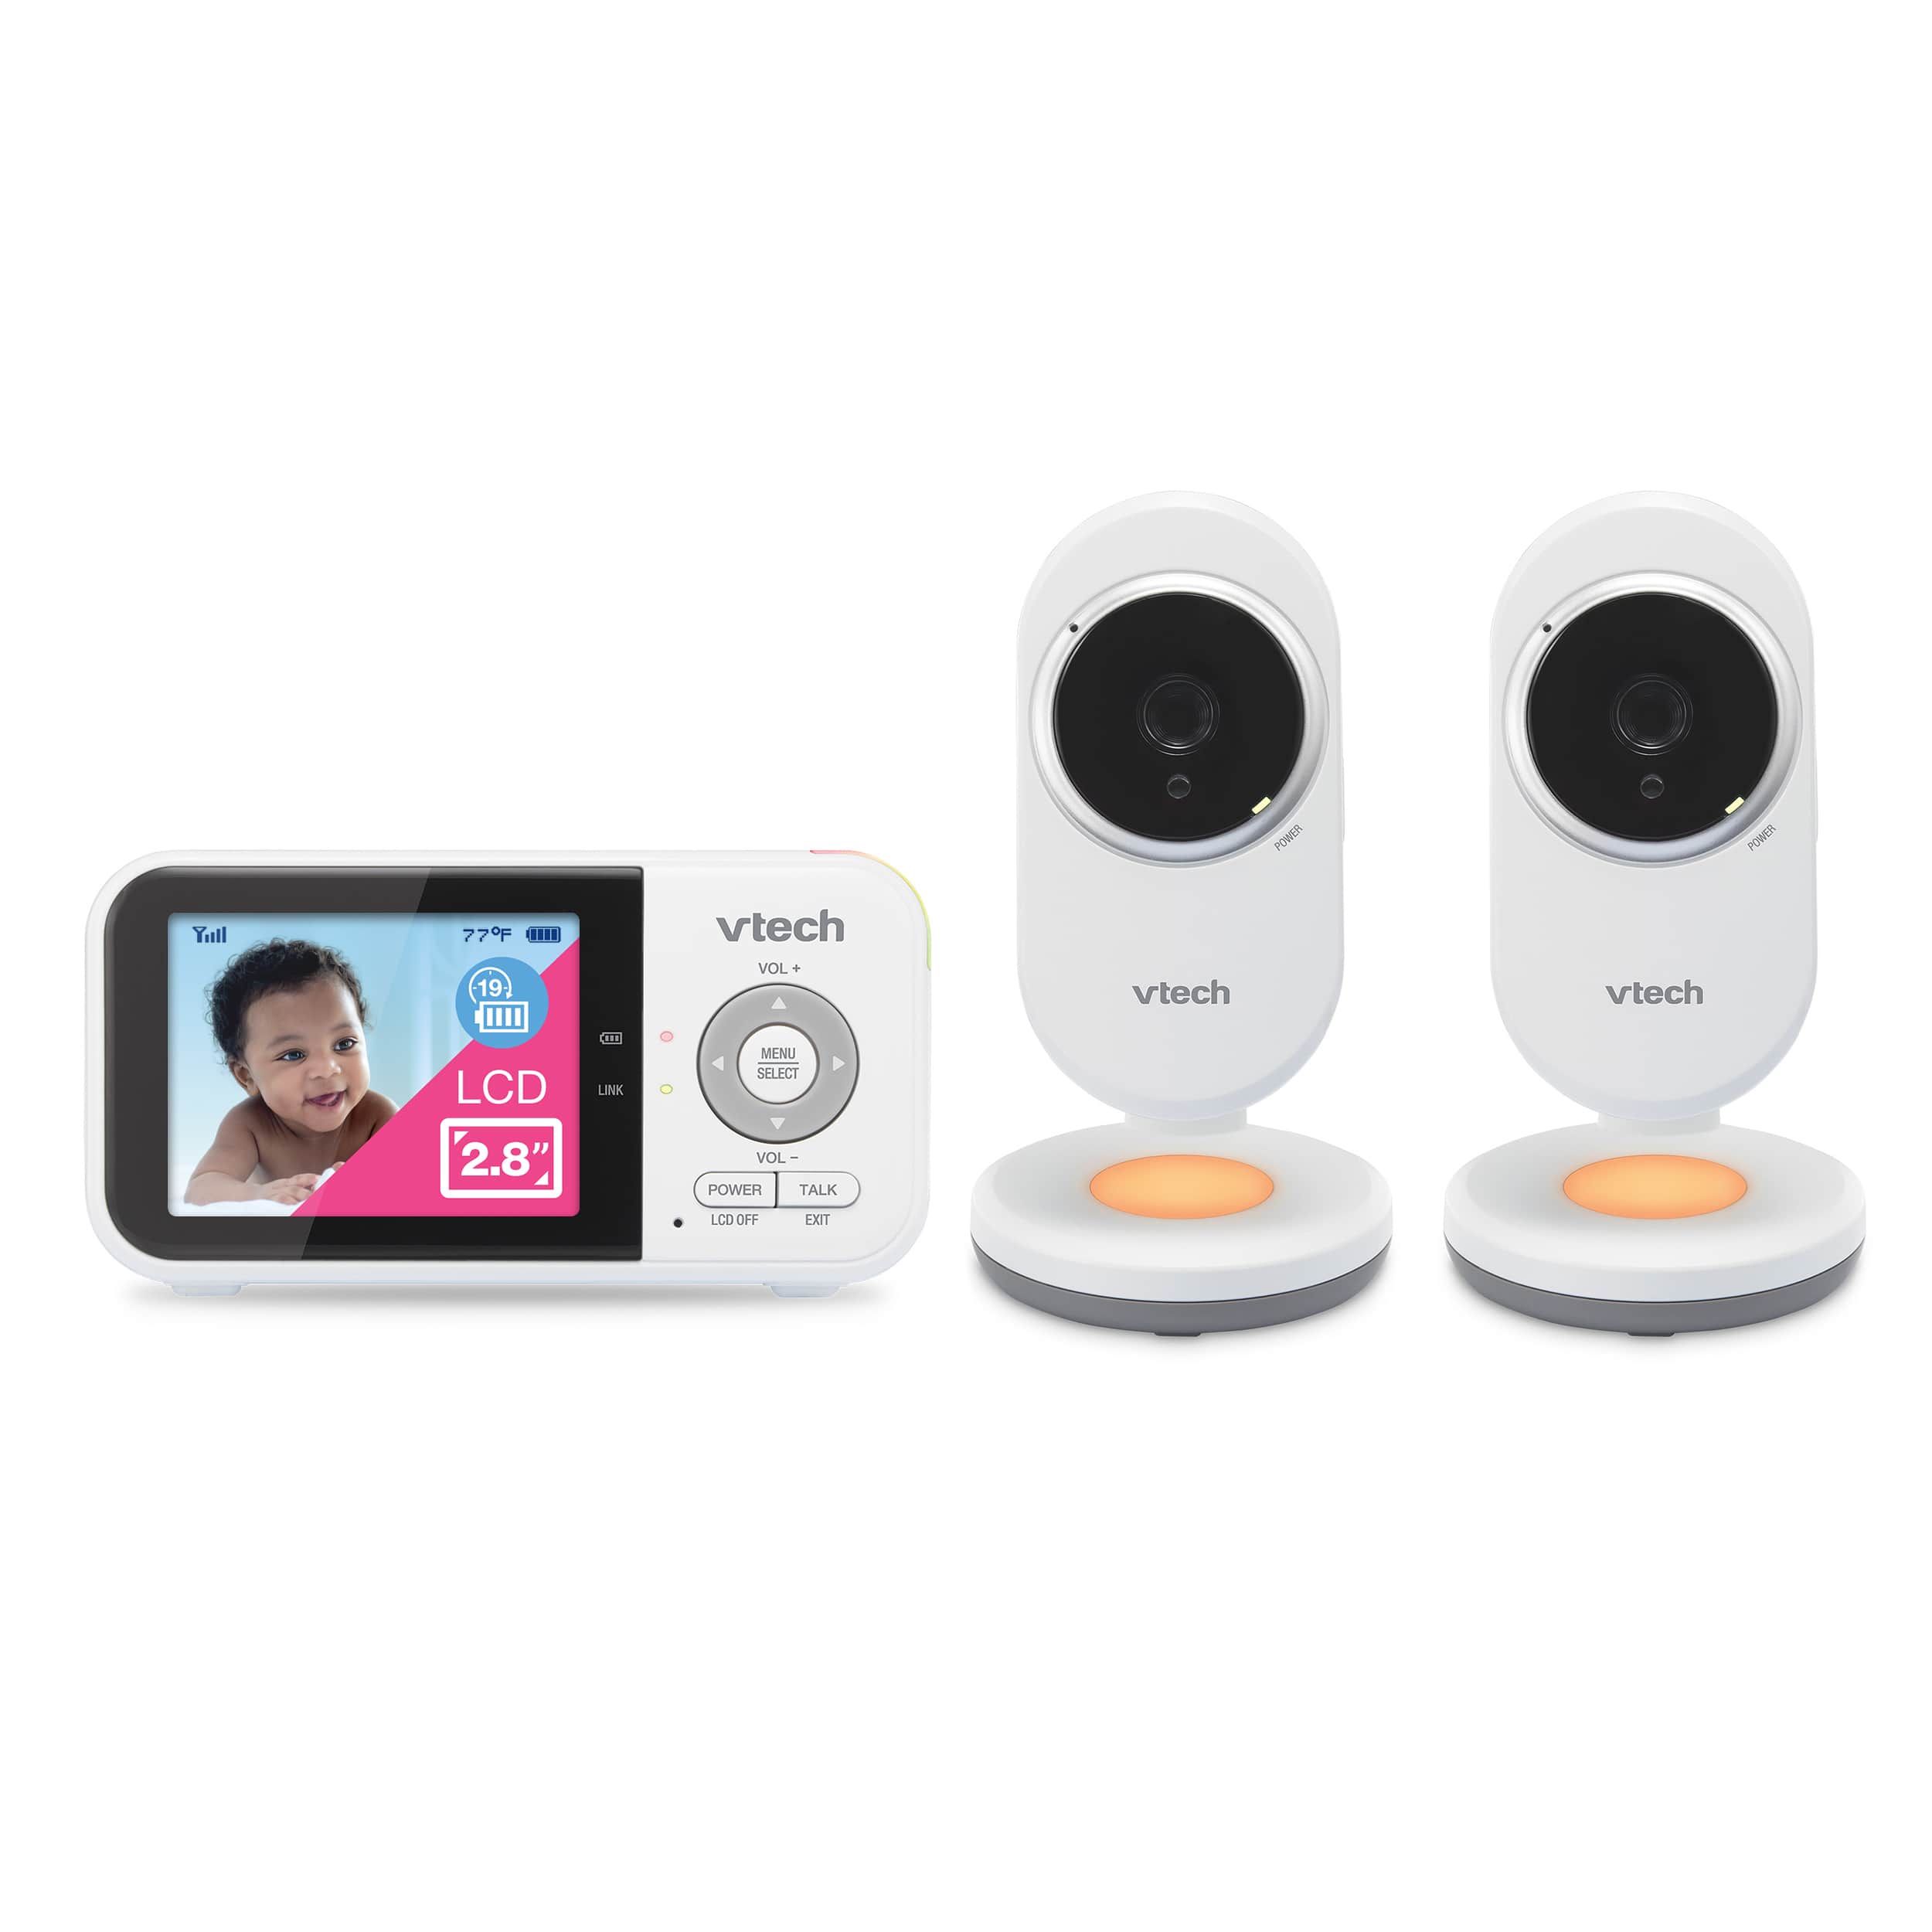 2 Camera 2.8" Digital Video Baby Monitor with Night Light - view 1